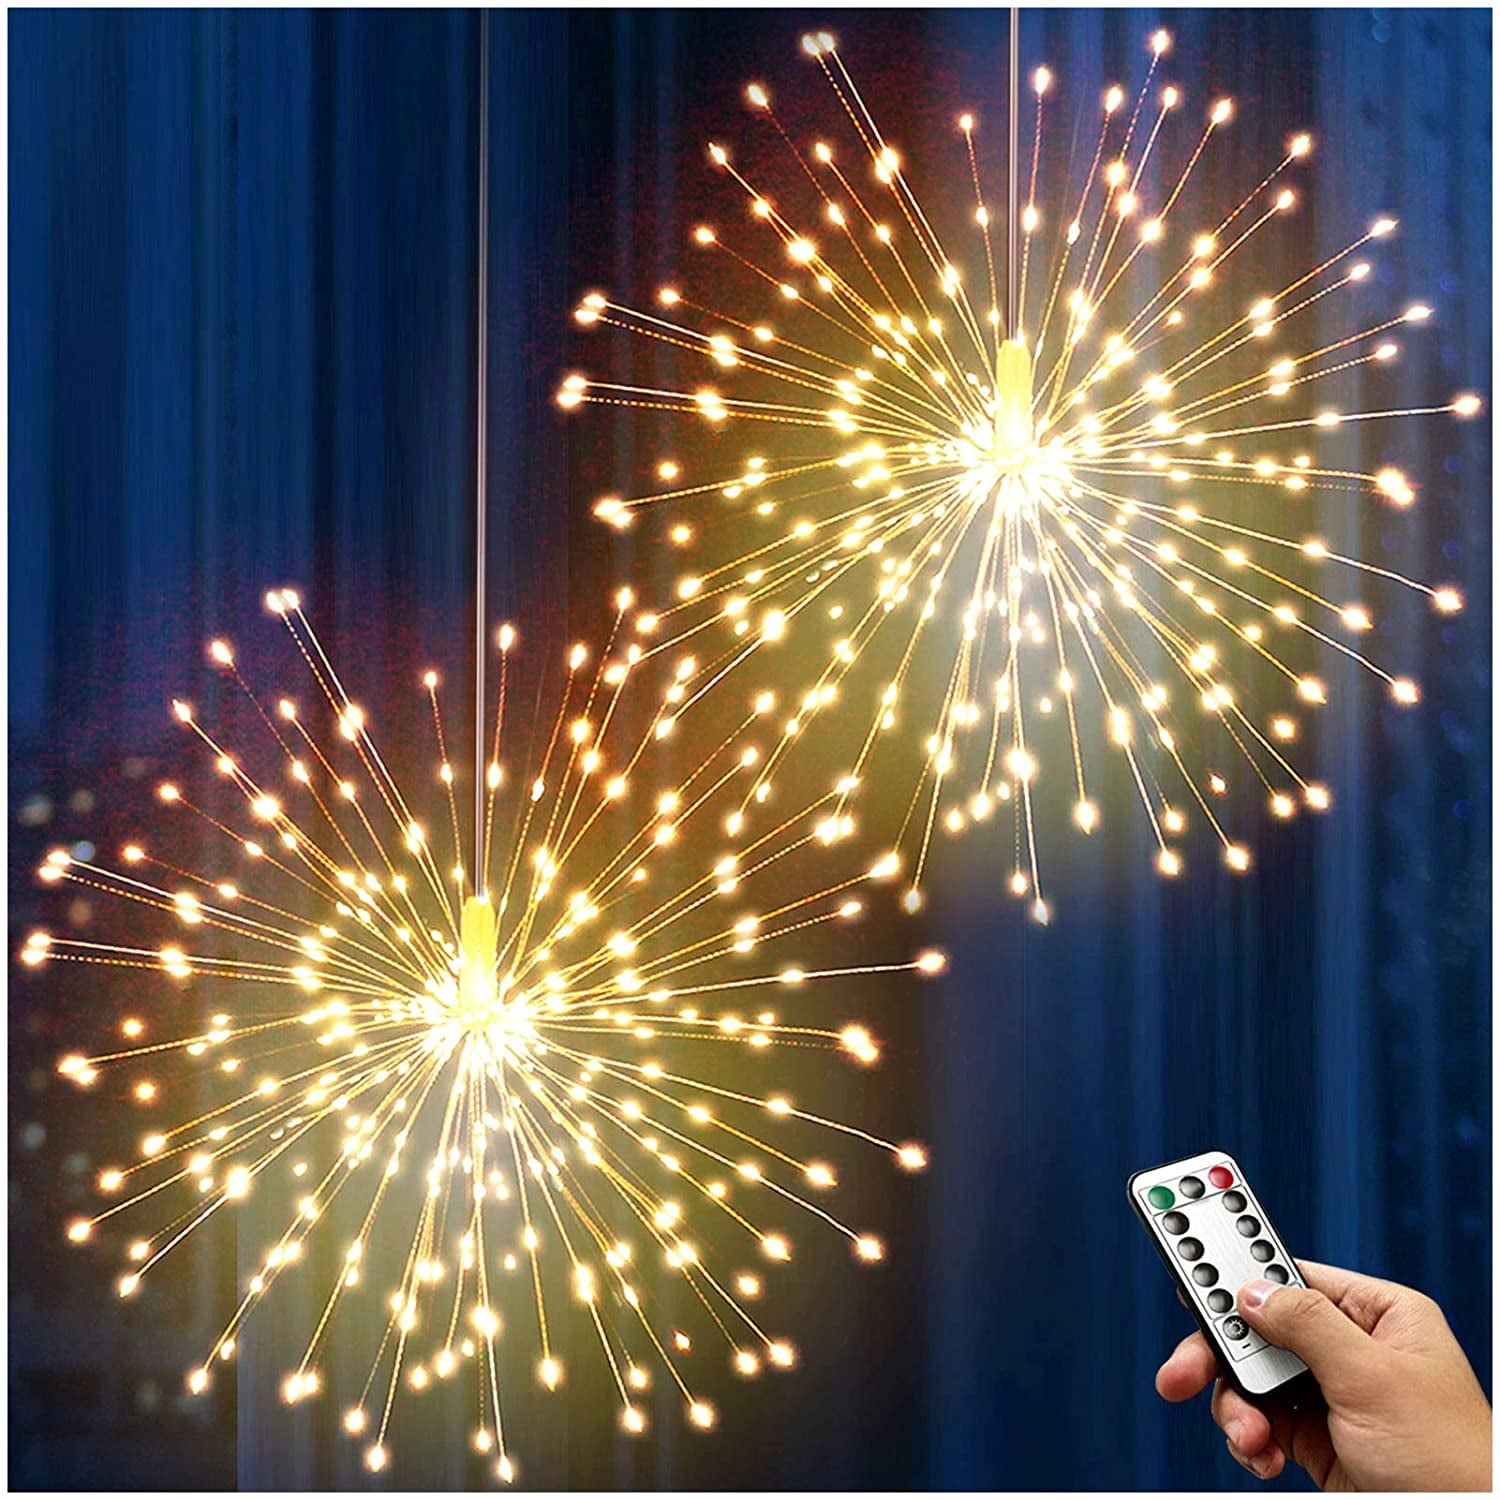 Hang Firework LED Fairy String Light 8Modes Remote Christmas Party Xmas Decor UP 